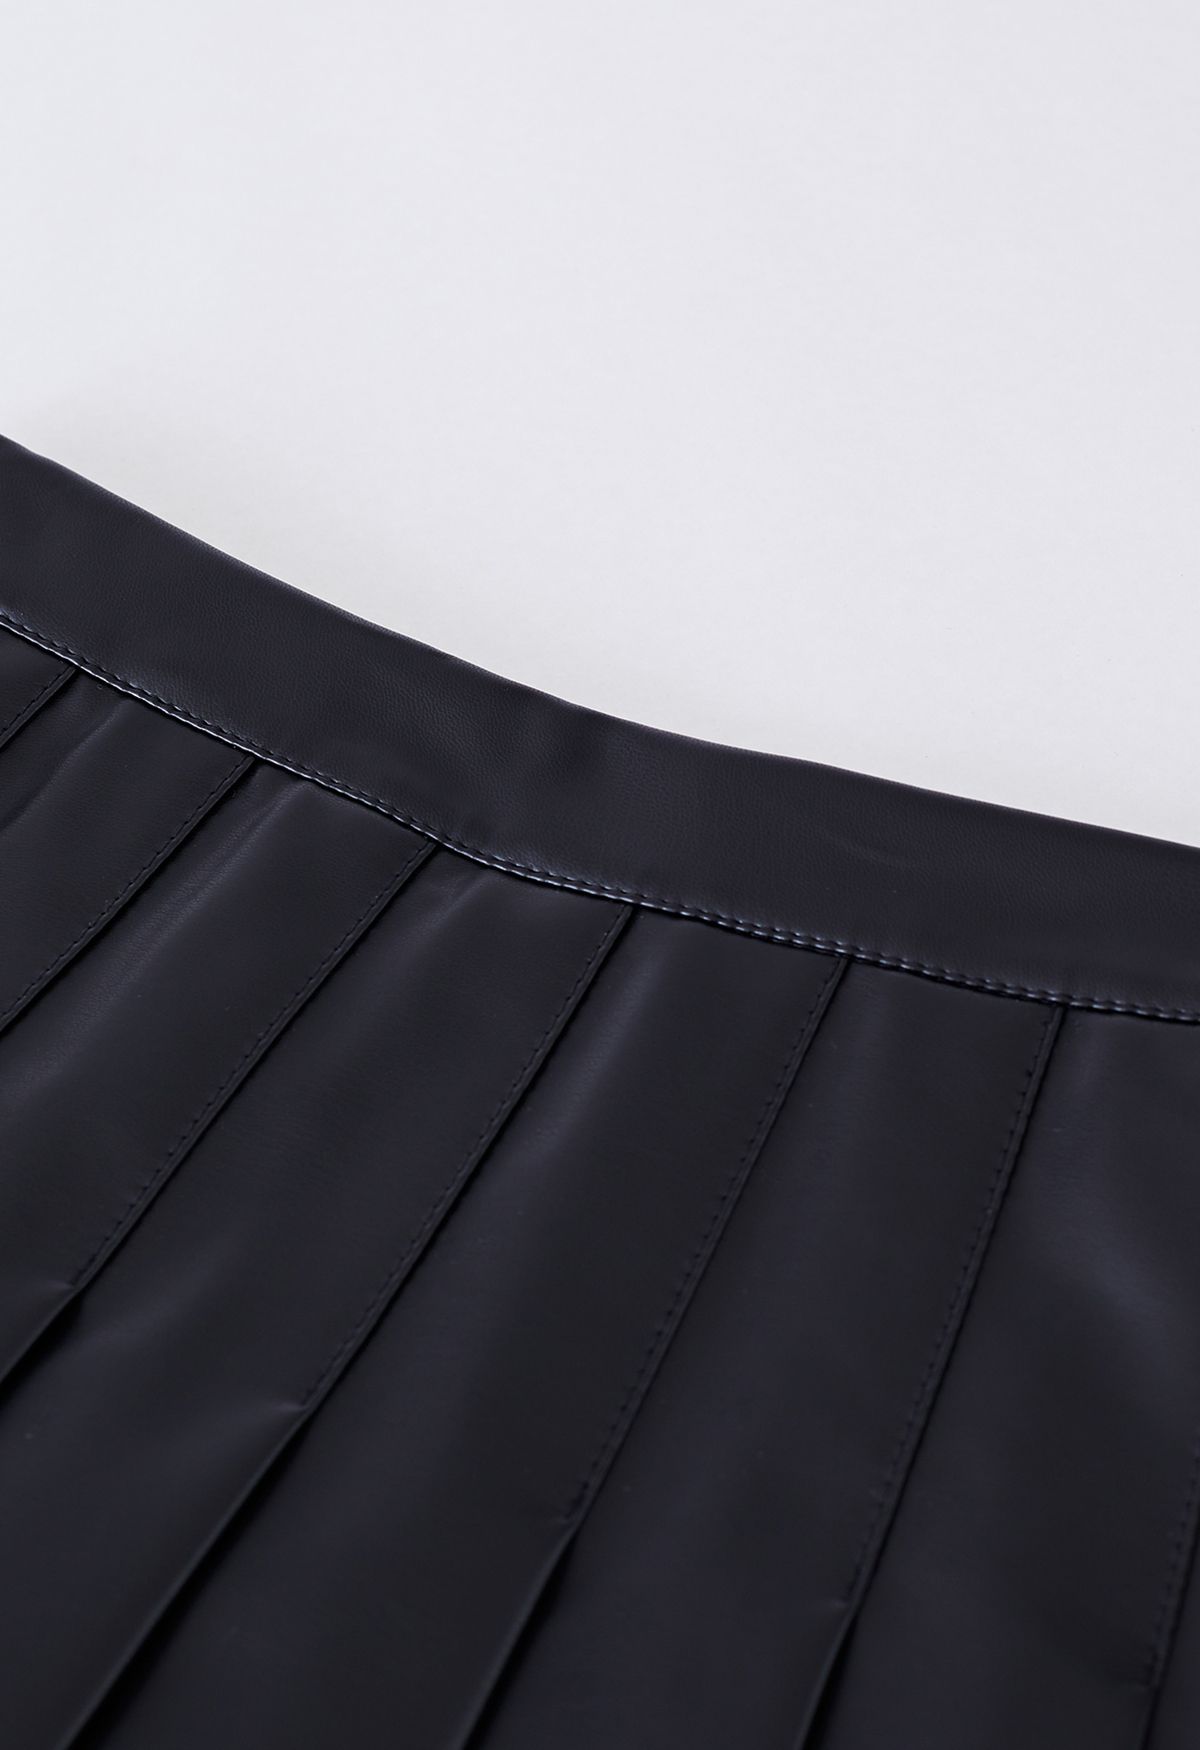 Faux Leather Pleated Flare Mini Skirt in Black